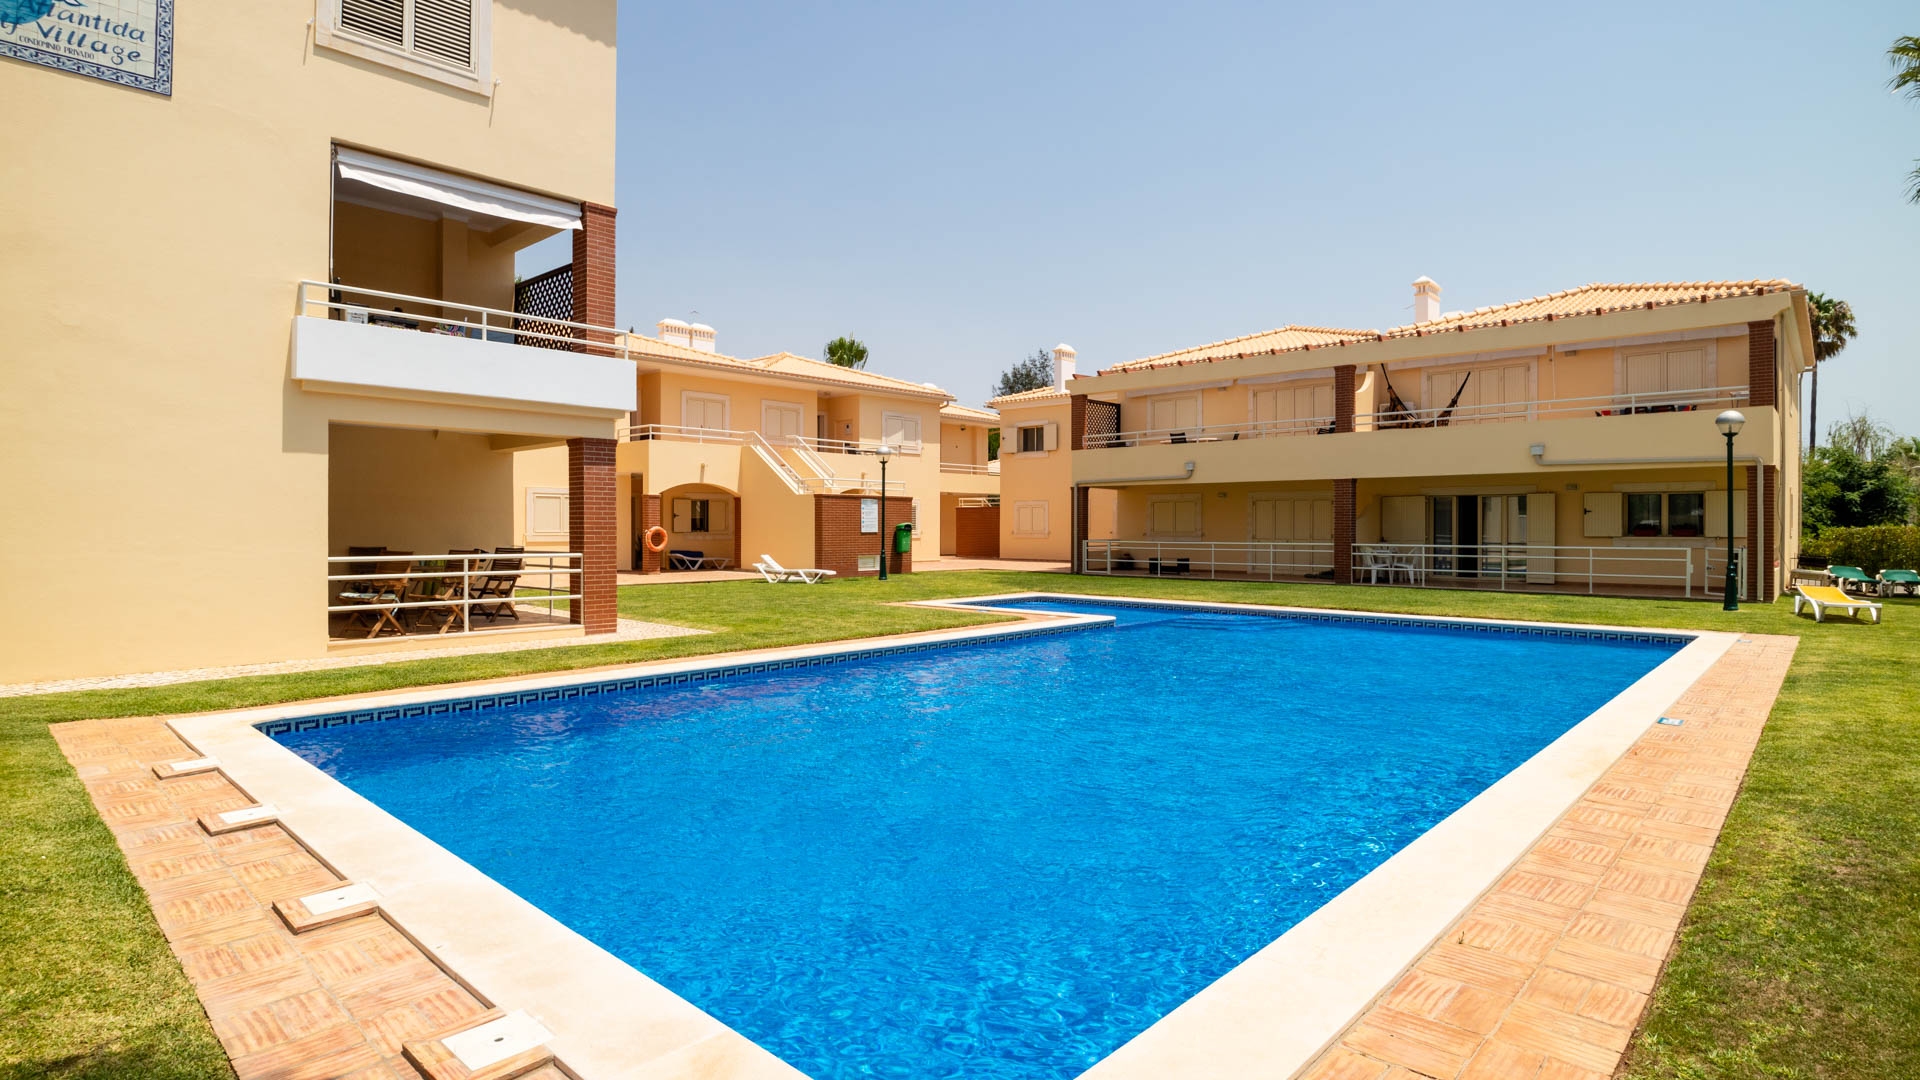 Newly Renovated 2 Bedroom Apartment with Open Plan Living and Golf Views, Vilamoura | VM1896 Open plan living in newly renovated property with golf views make this apartment perfect for an investment.